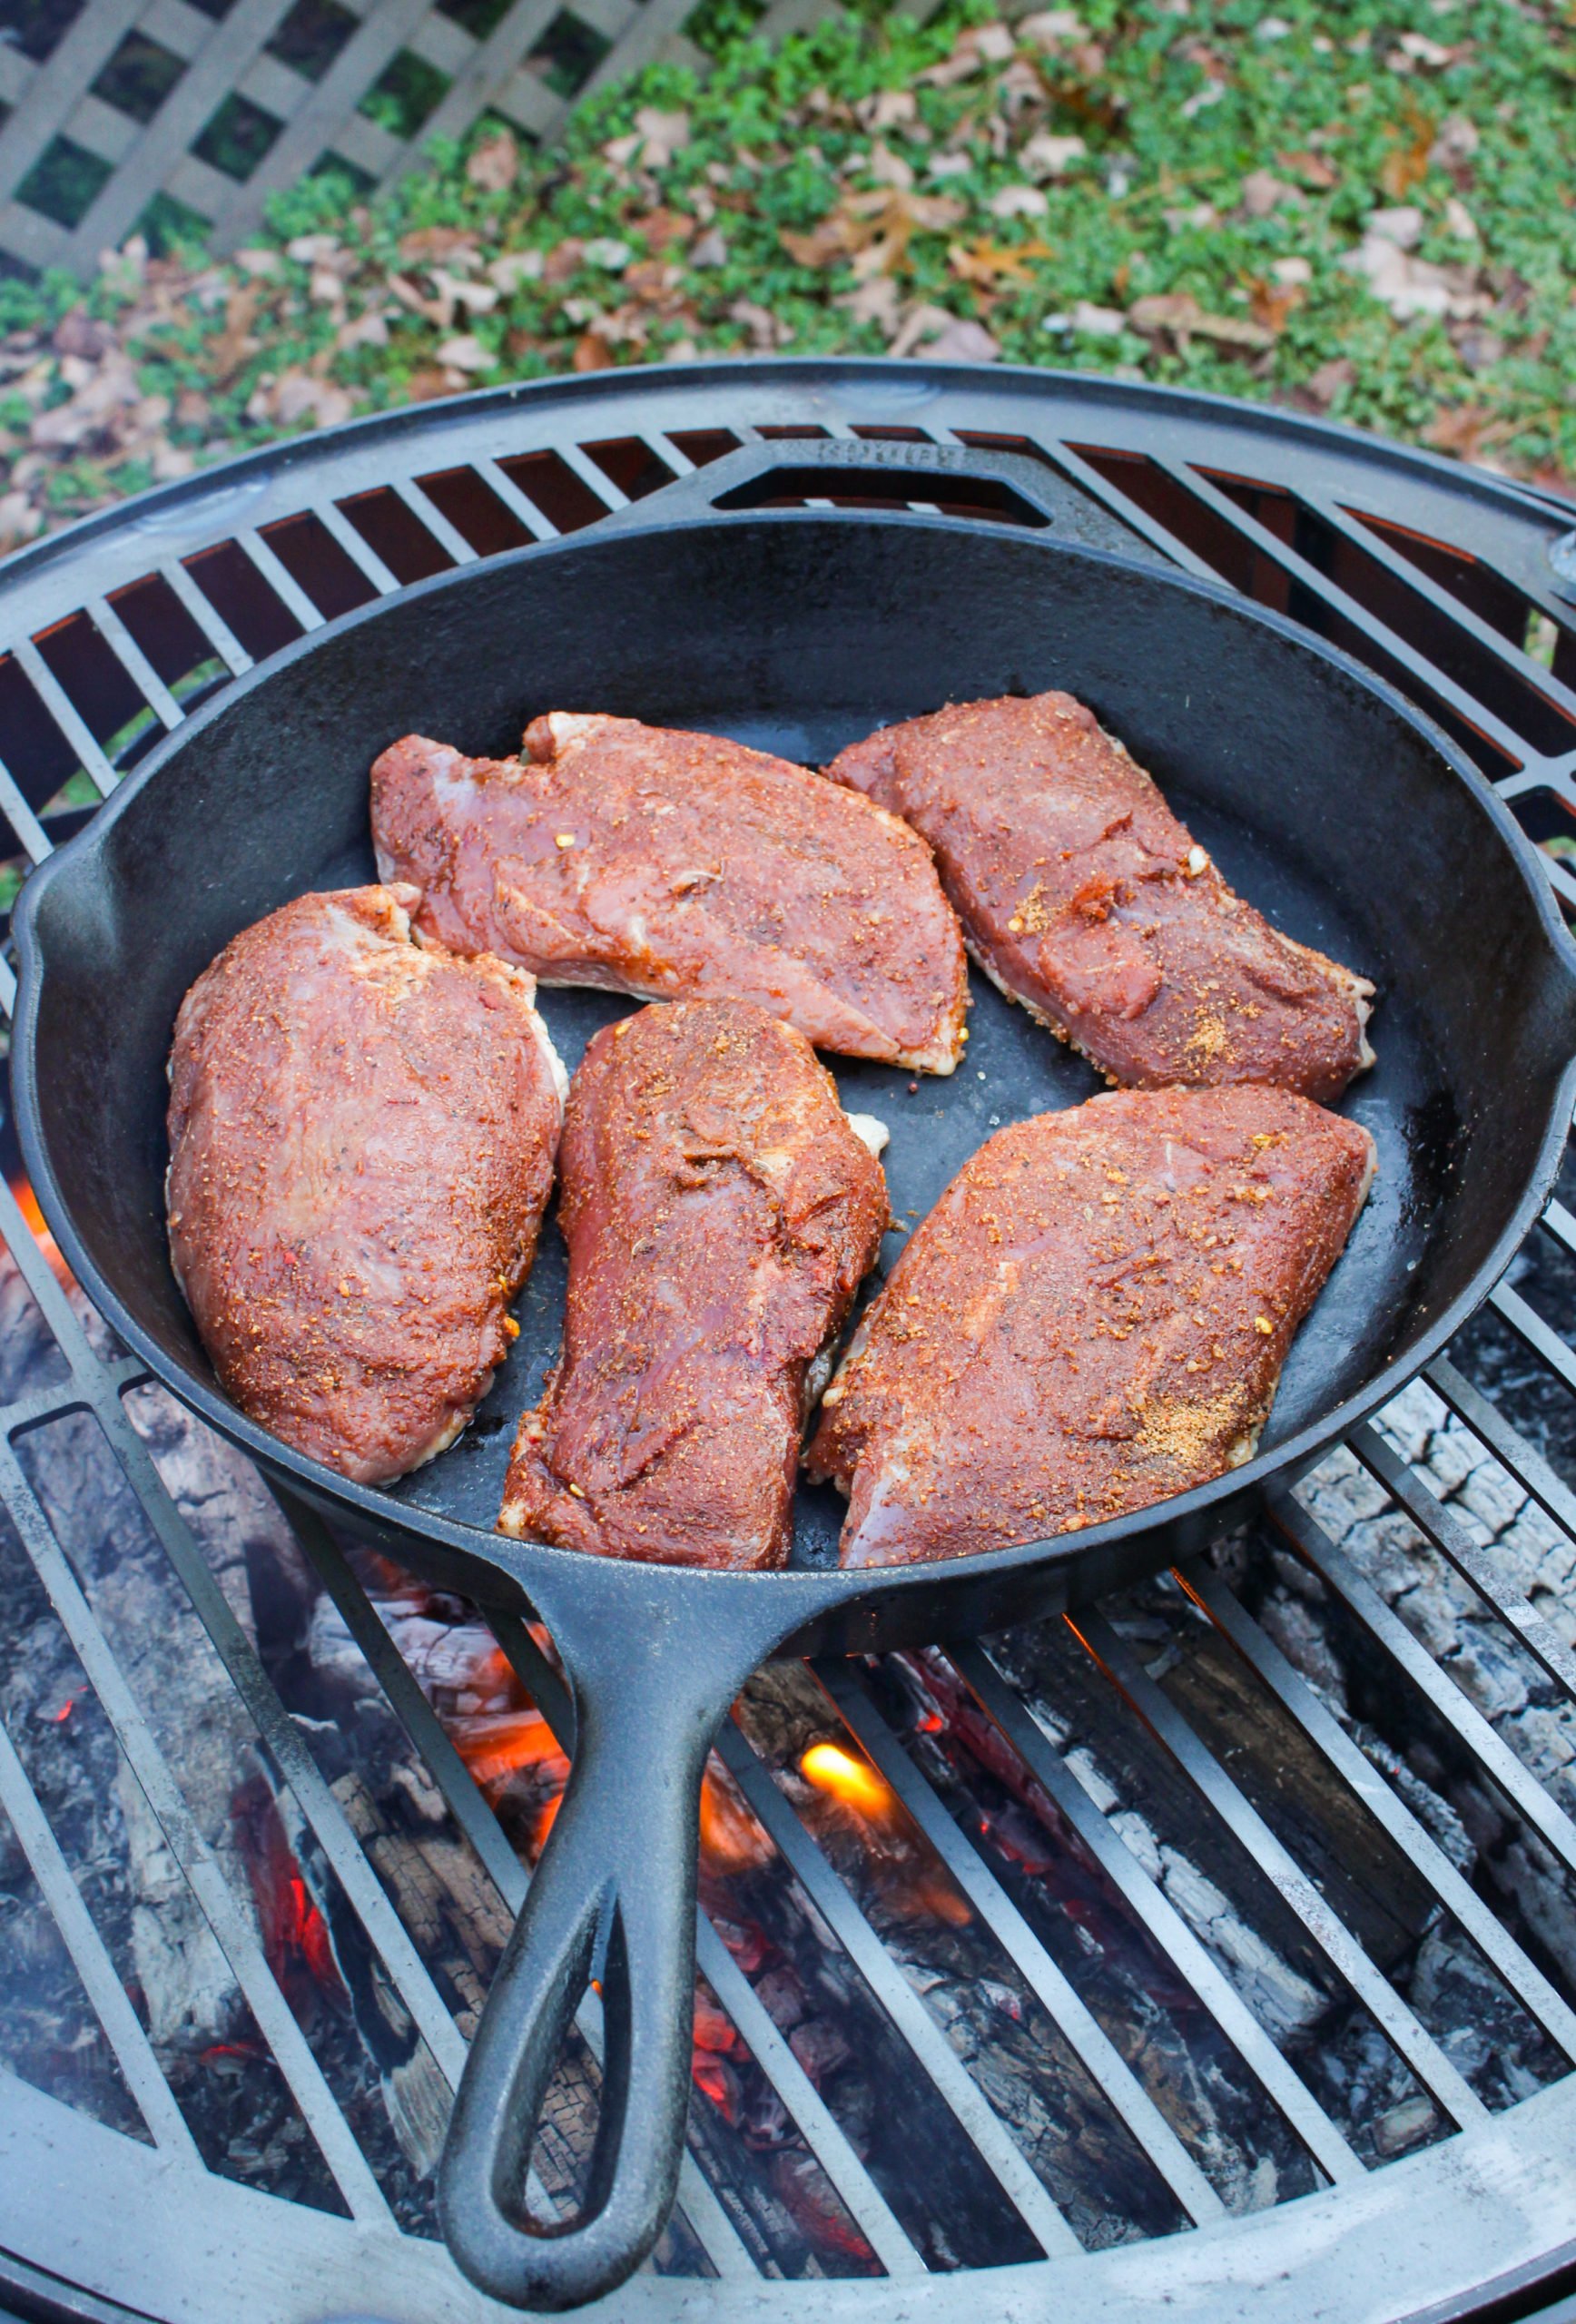 Seared Duck Breast in the skillet on the grill.